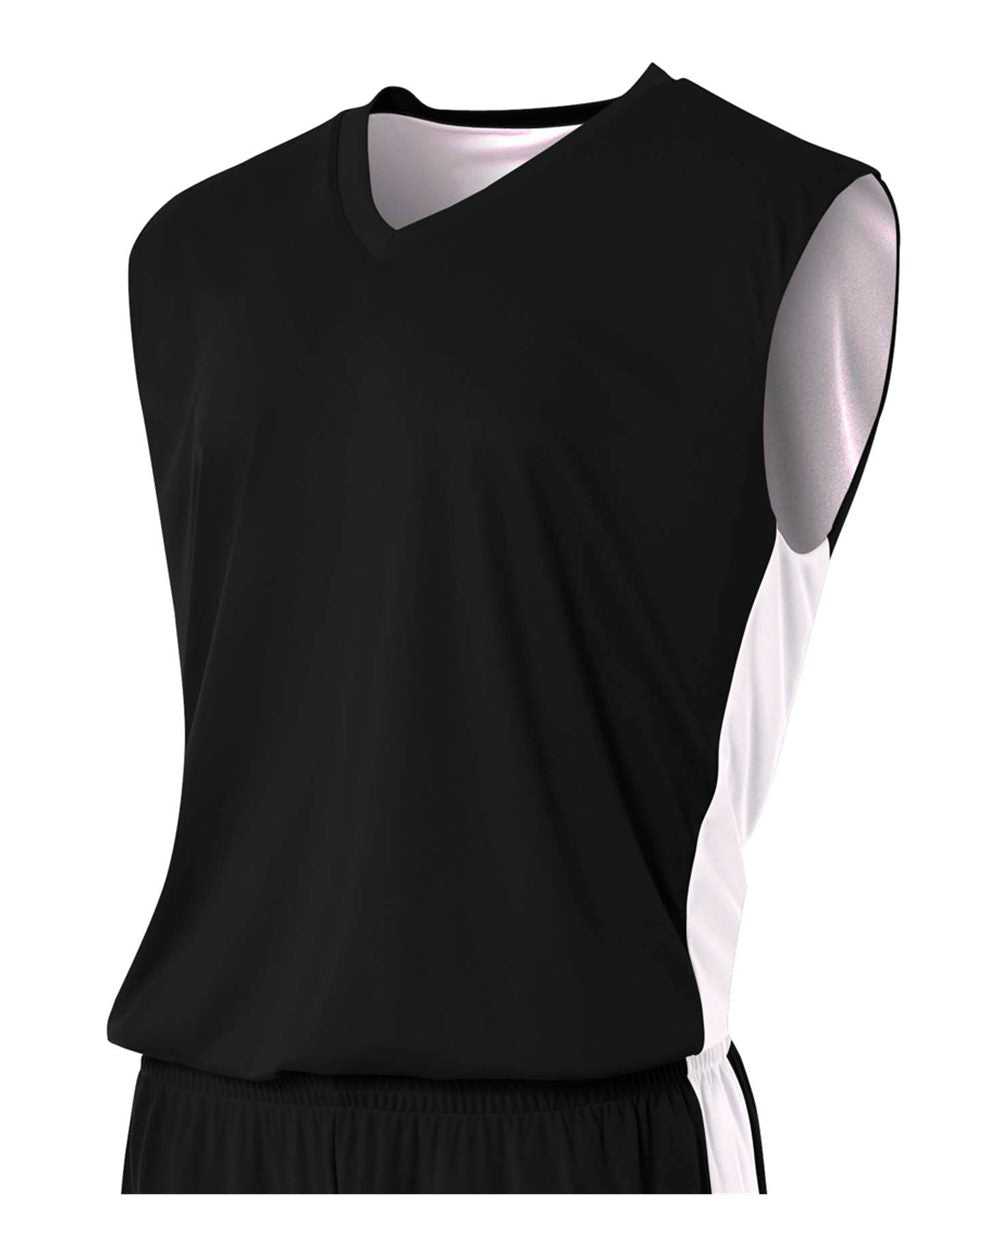 A4 N2320 Reversible Moisture Management Muscle - Black White - HIT a Double